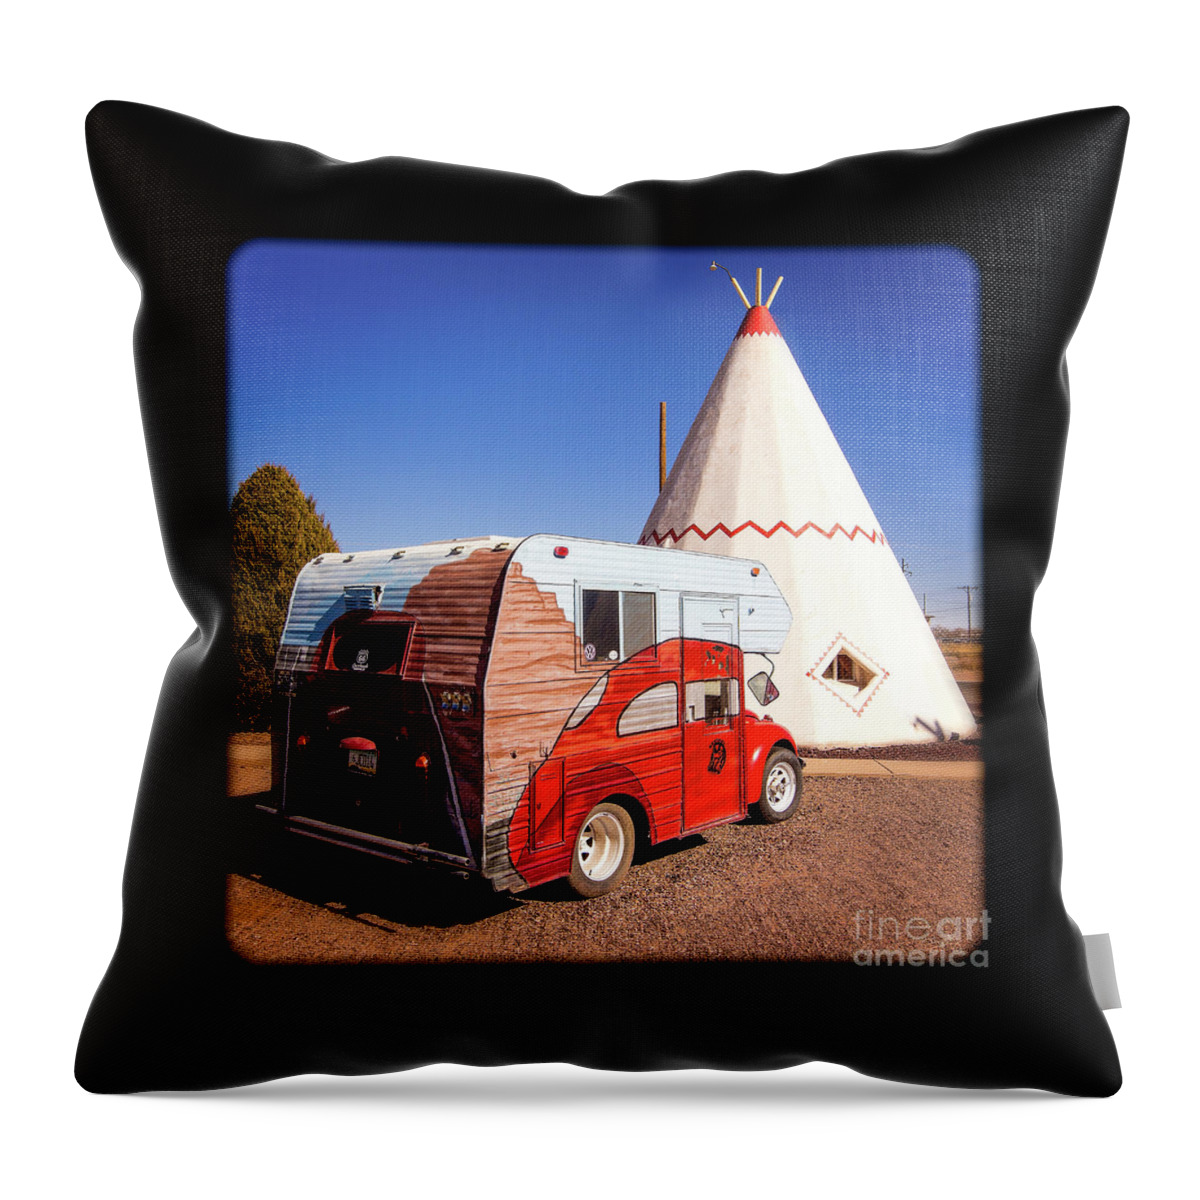 Vintage Volkswagon Beatle Camper Throw Pillow featuring the photograph Vintage Volkswagon Beatle Camper by Imagery by Charly